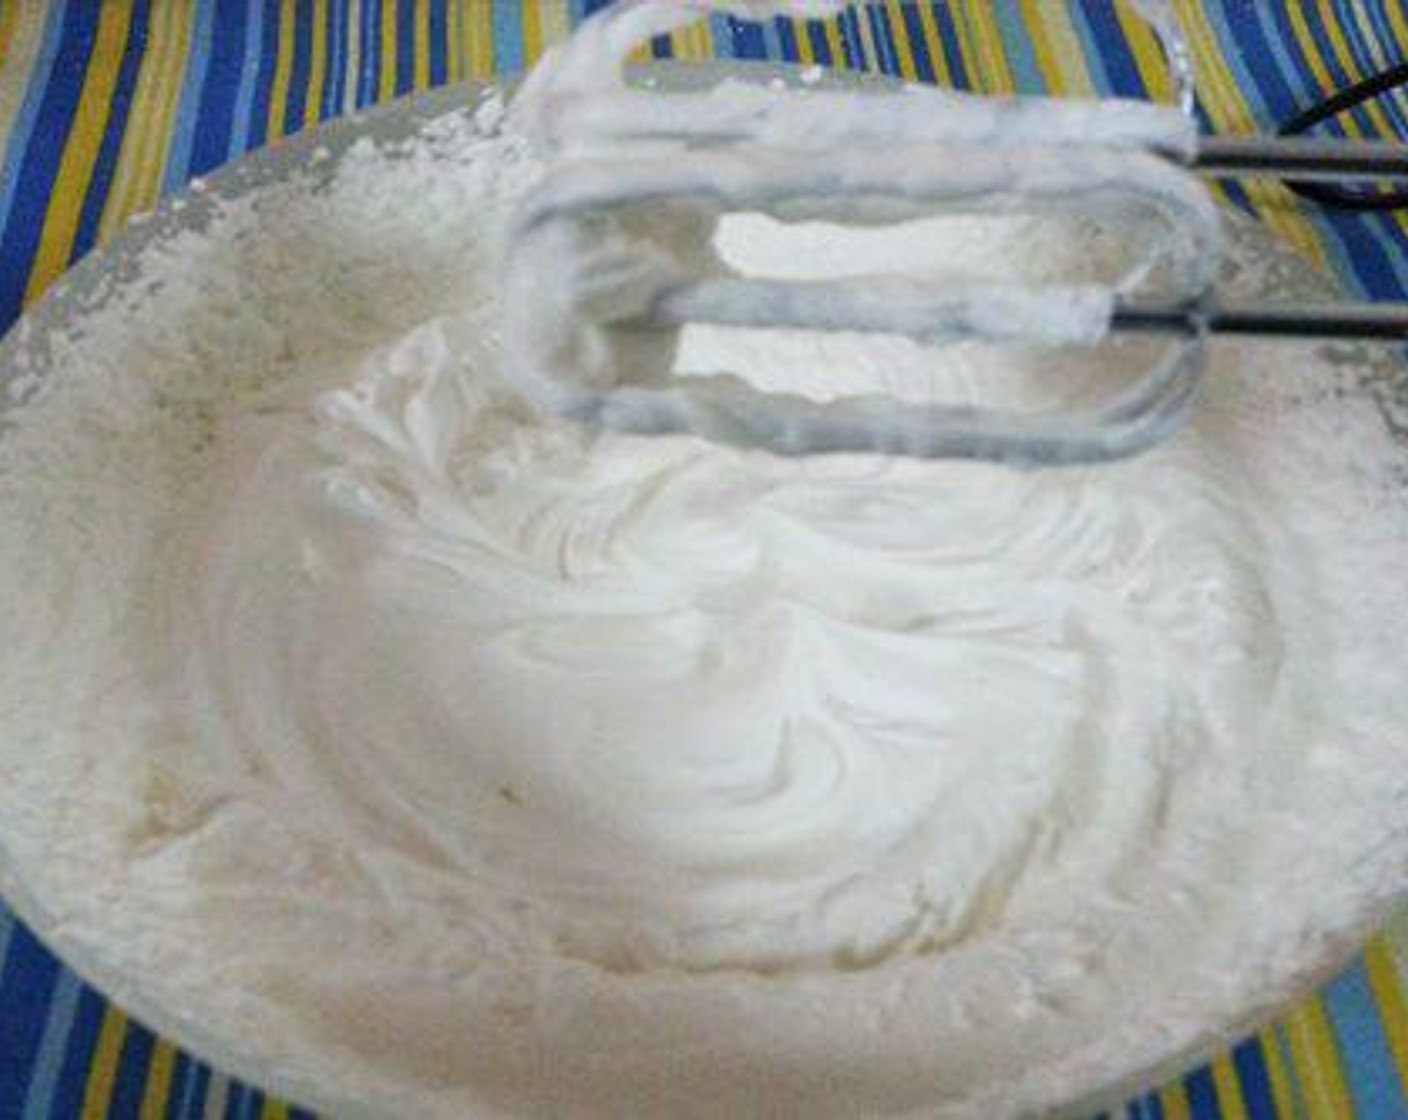 step 2 Pour Whipping Cream (2 cups) to a bowl along with the Powdered Confectioners Sugar (1 cup) and Vanilla Essence (1/2 tsp) and whip until soft peaks are formed